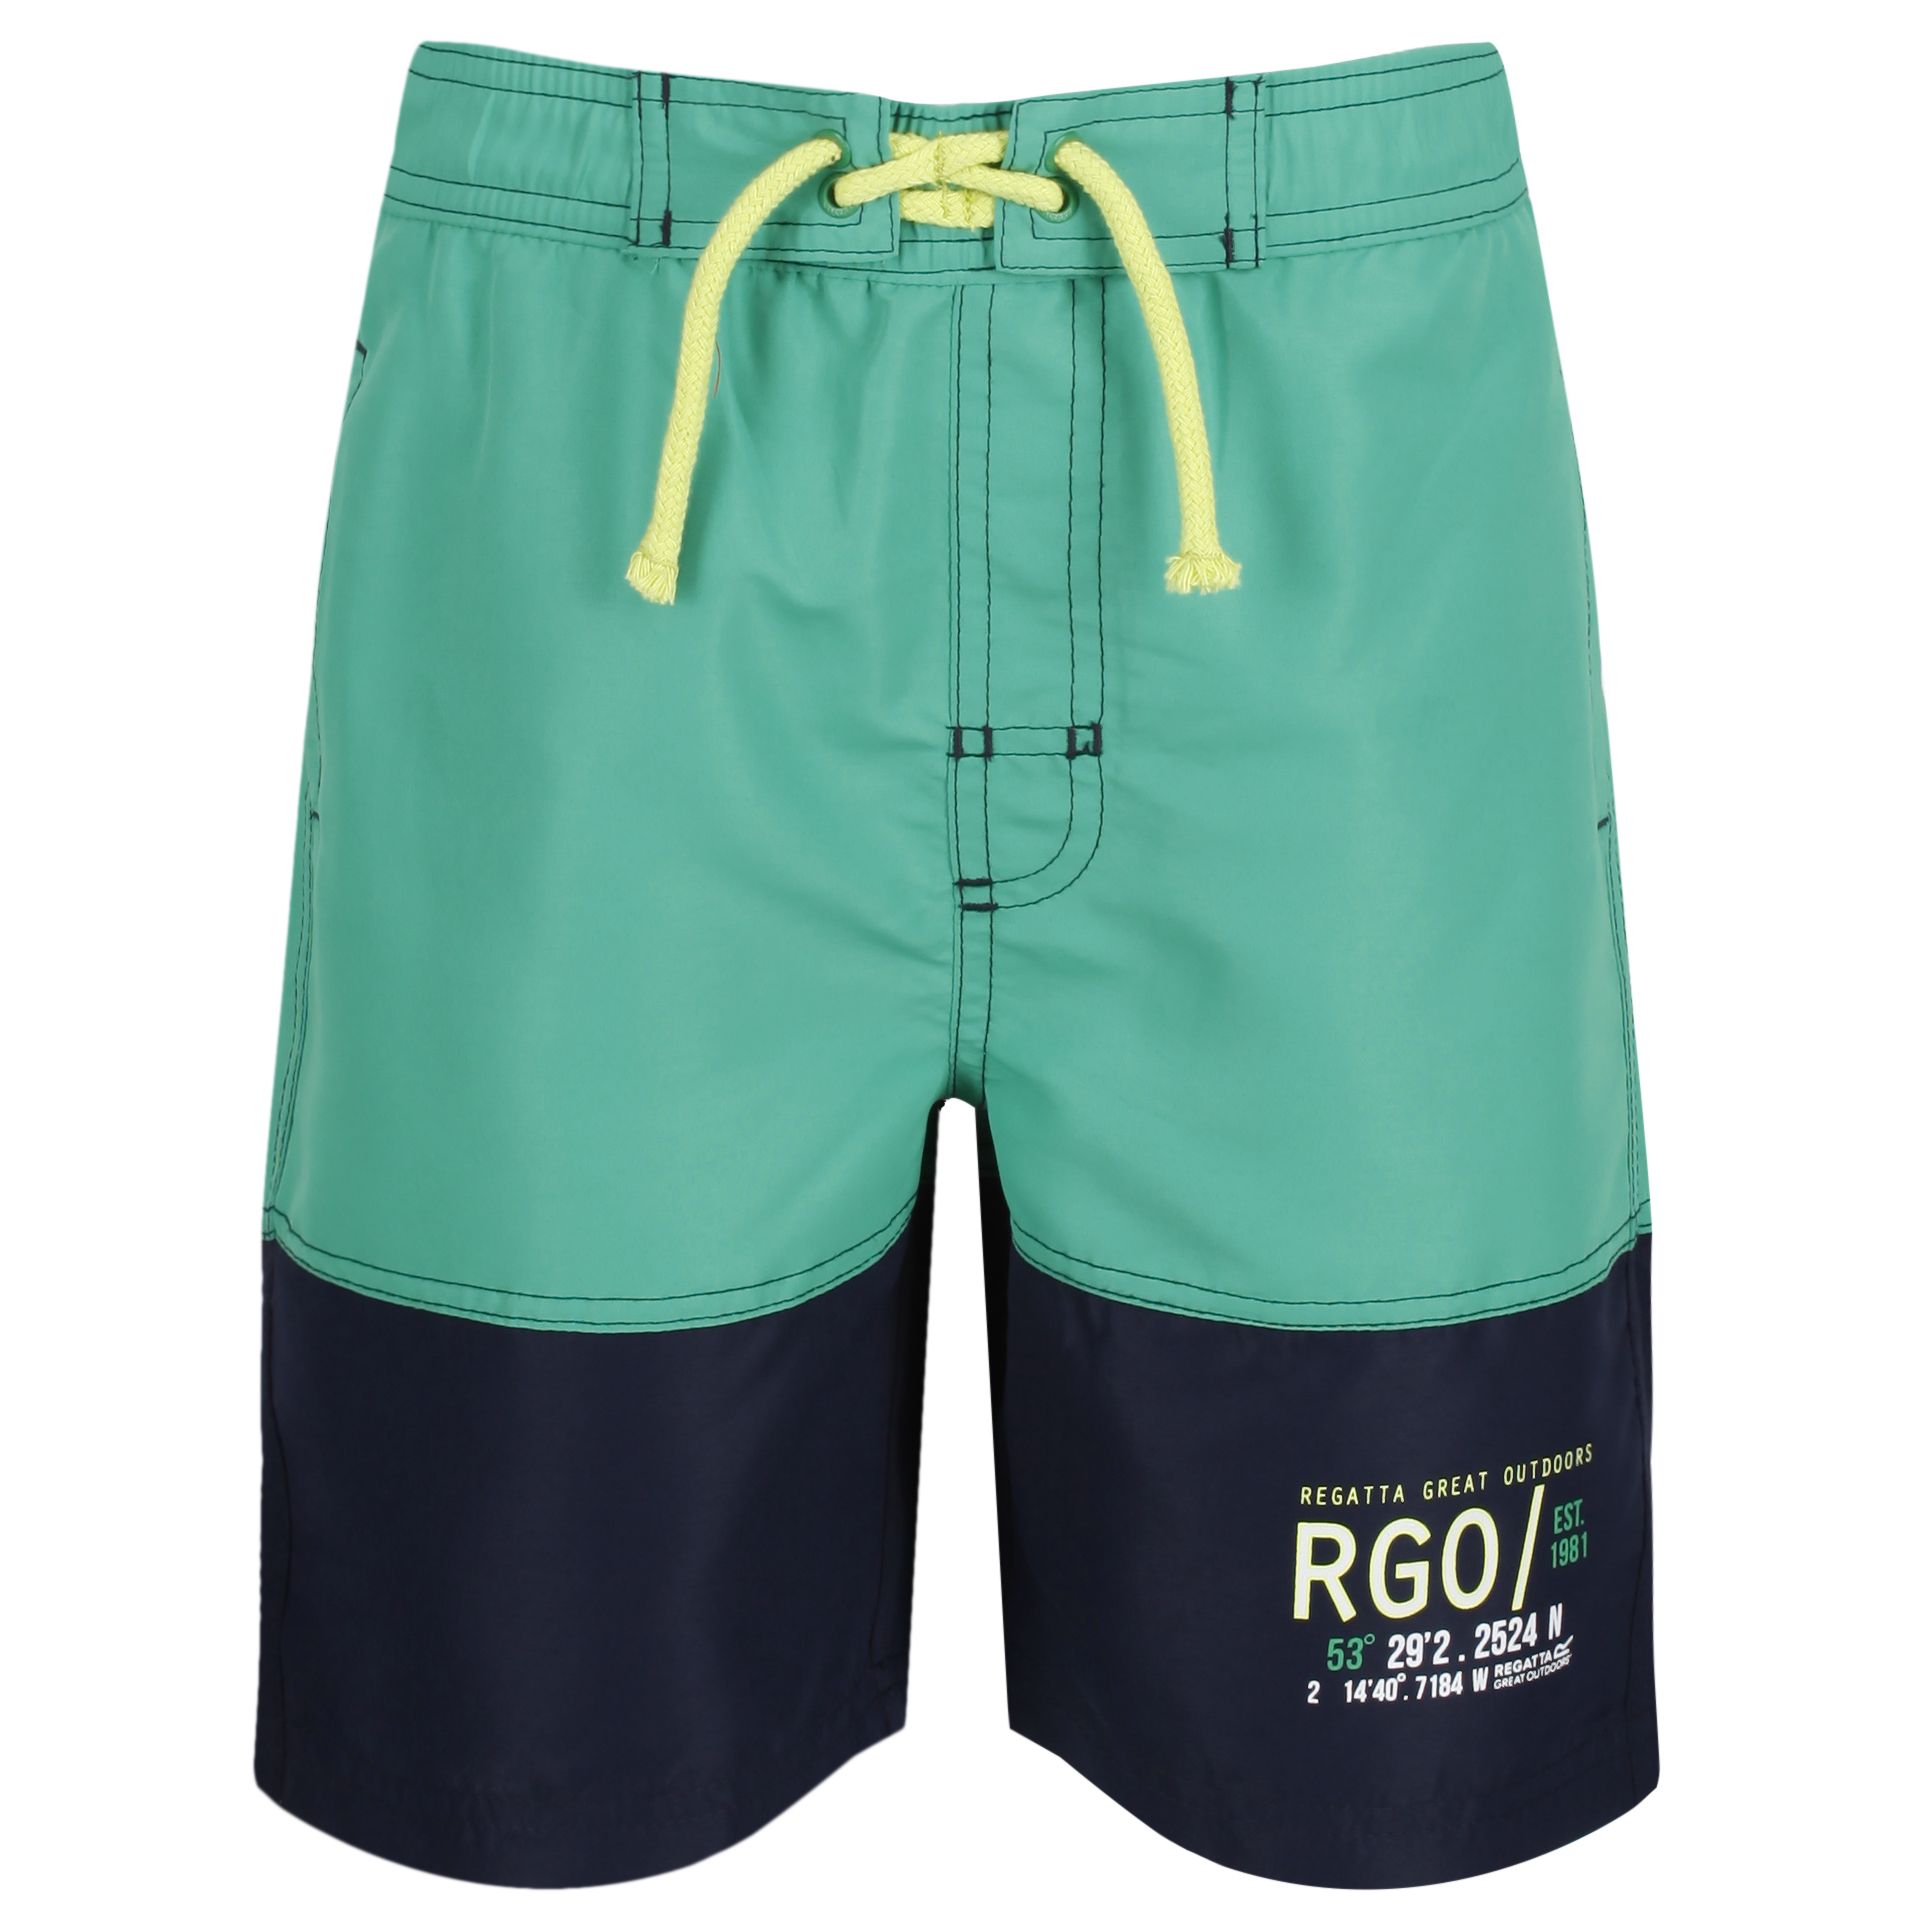 Material: 100% polyester taslan fabric. Quick drying fabric. Long-length board shorts. With a drawcord waist, an airy mesh brief liner and pockets to the side and back. Size (height/waist): (2 Years) 92cm/52-53cm, (3-4 Years) 98-104cm/53-54cm, (5-6 Years) 110-116cm/55-57cm, (7-8 Years) 122-128cm/58-60cm, (9-10 Years) 135-140cm/61-64cm, (11-12 Years) 146-152cm/65-66cm, (13 Years) 153-158cm/69cm, (14 Years) 164-170cm/73cm, (15-16 Years) 170-176cm/76-79cm.